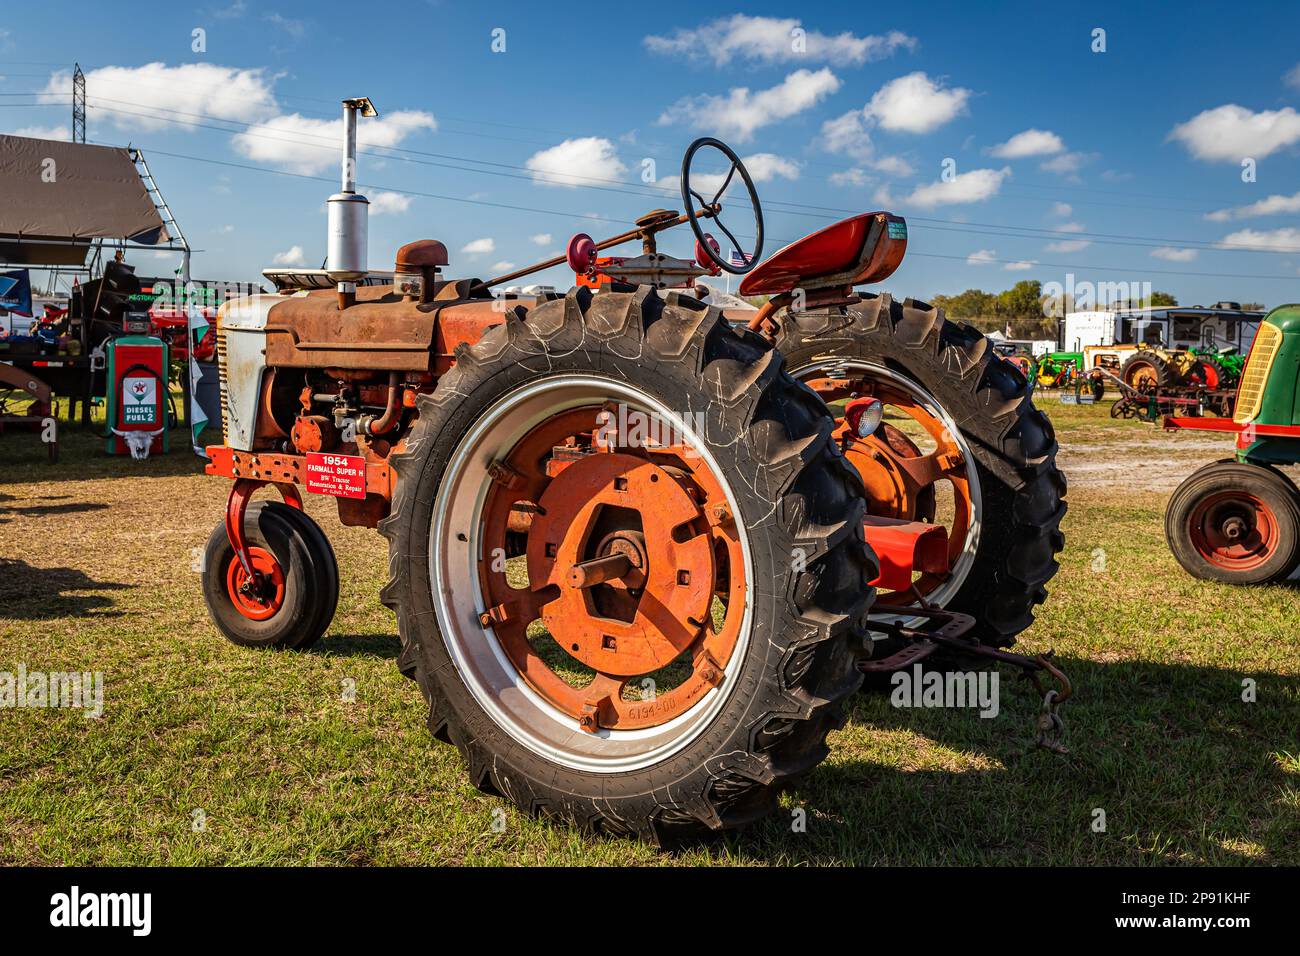 Fort Meade, FL - February 26, 2022: High perspective rear corner view of a 1954 International Harvester McCormick Farmall Super H Tractor at a local t Stock Photo